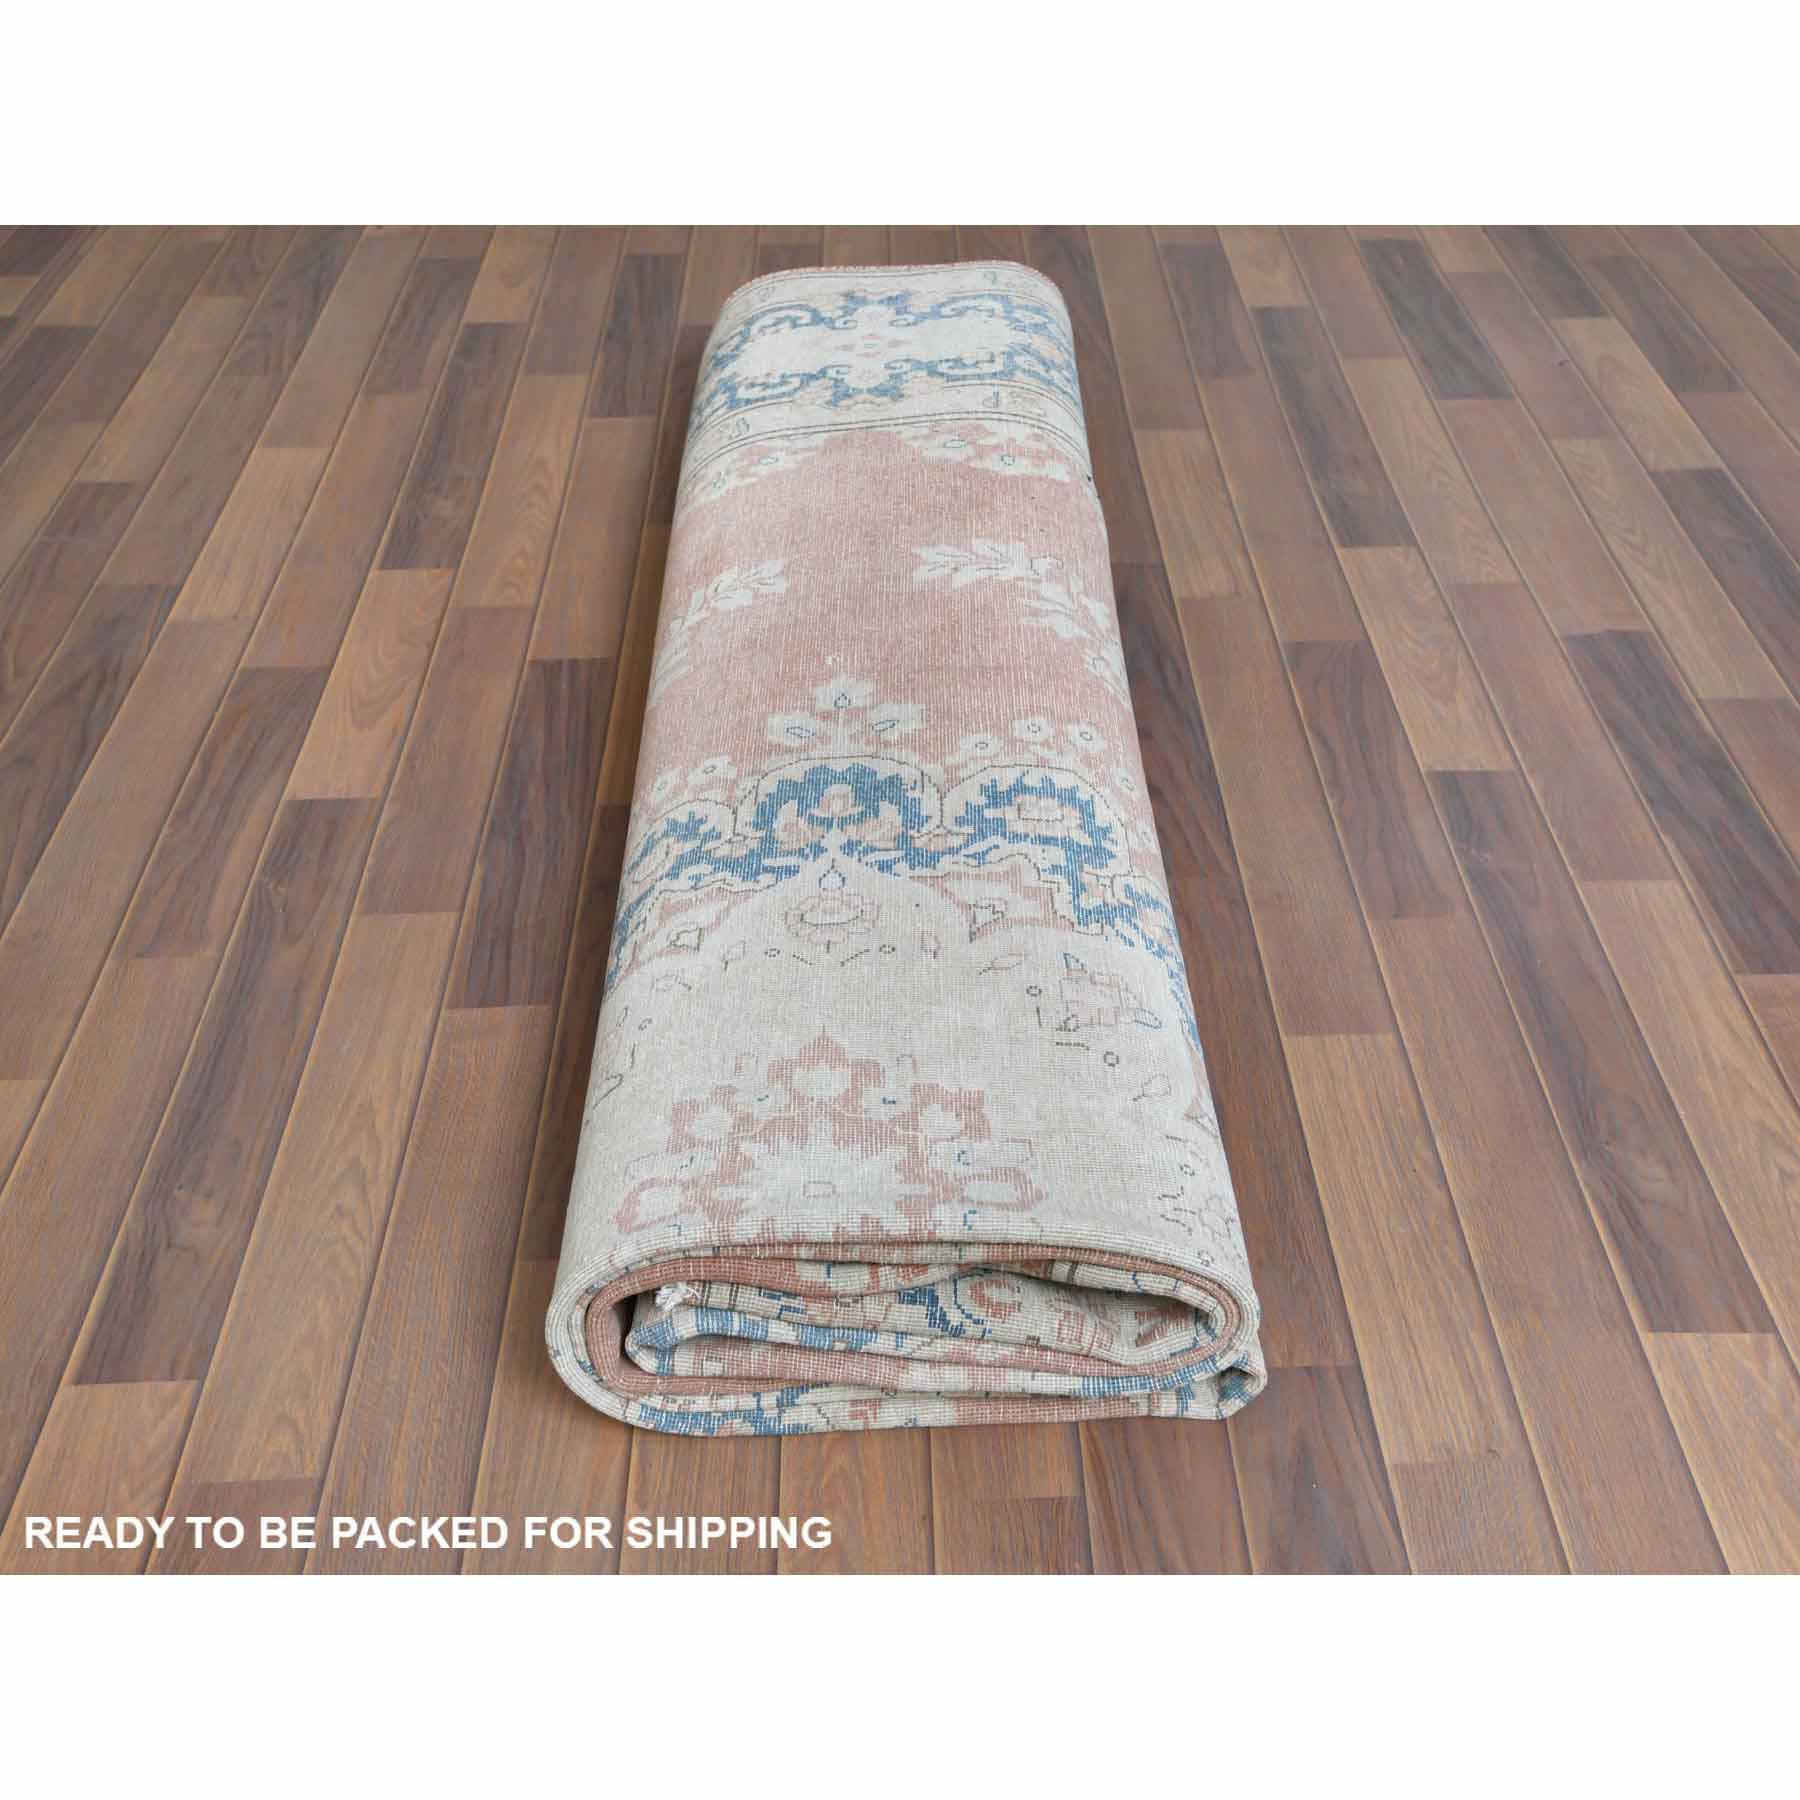 Overdyed-Vintage-Hand-Knotted-Rug-307020